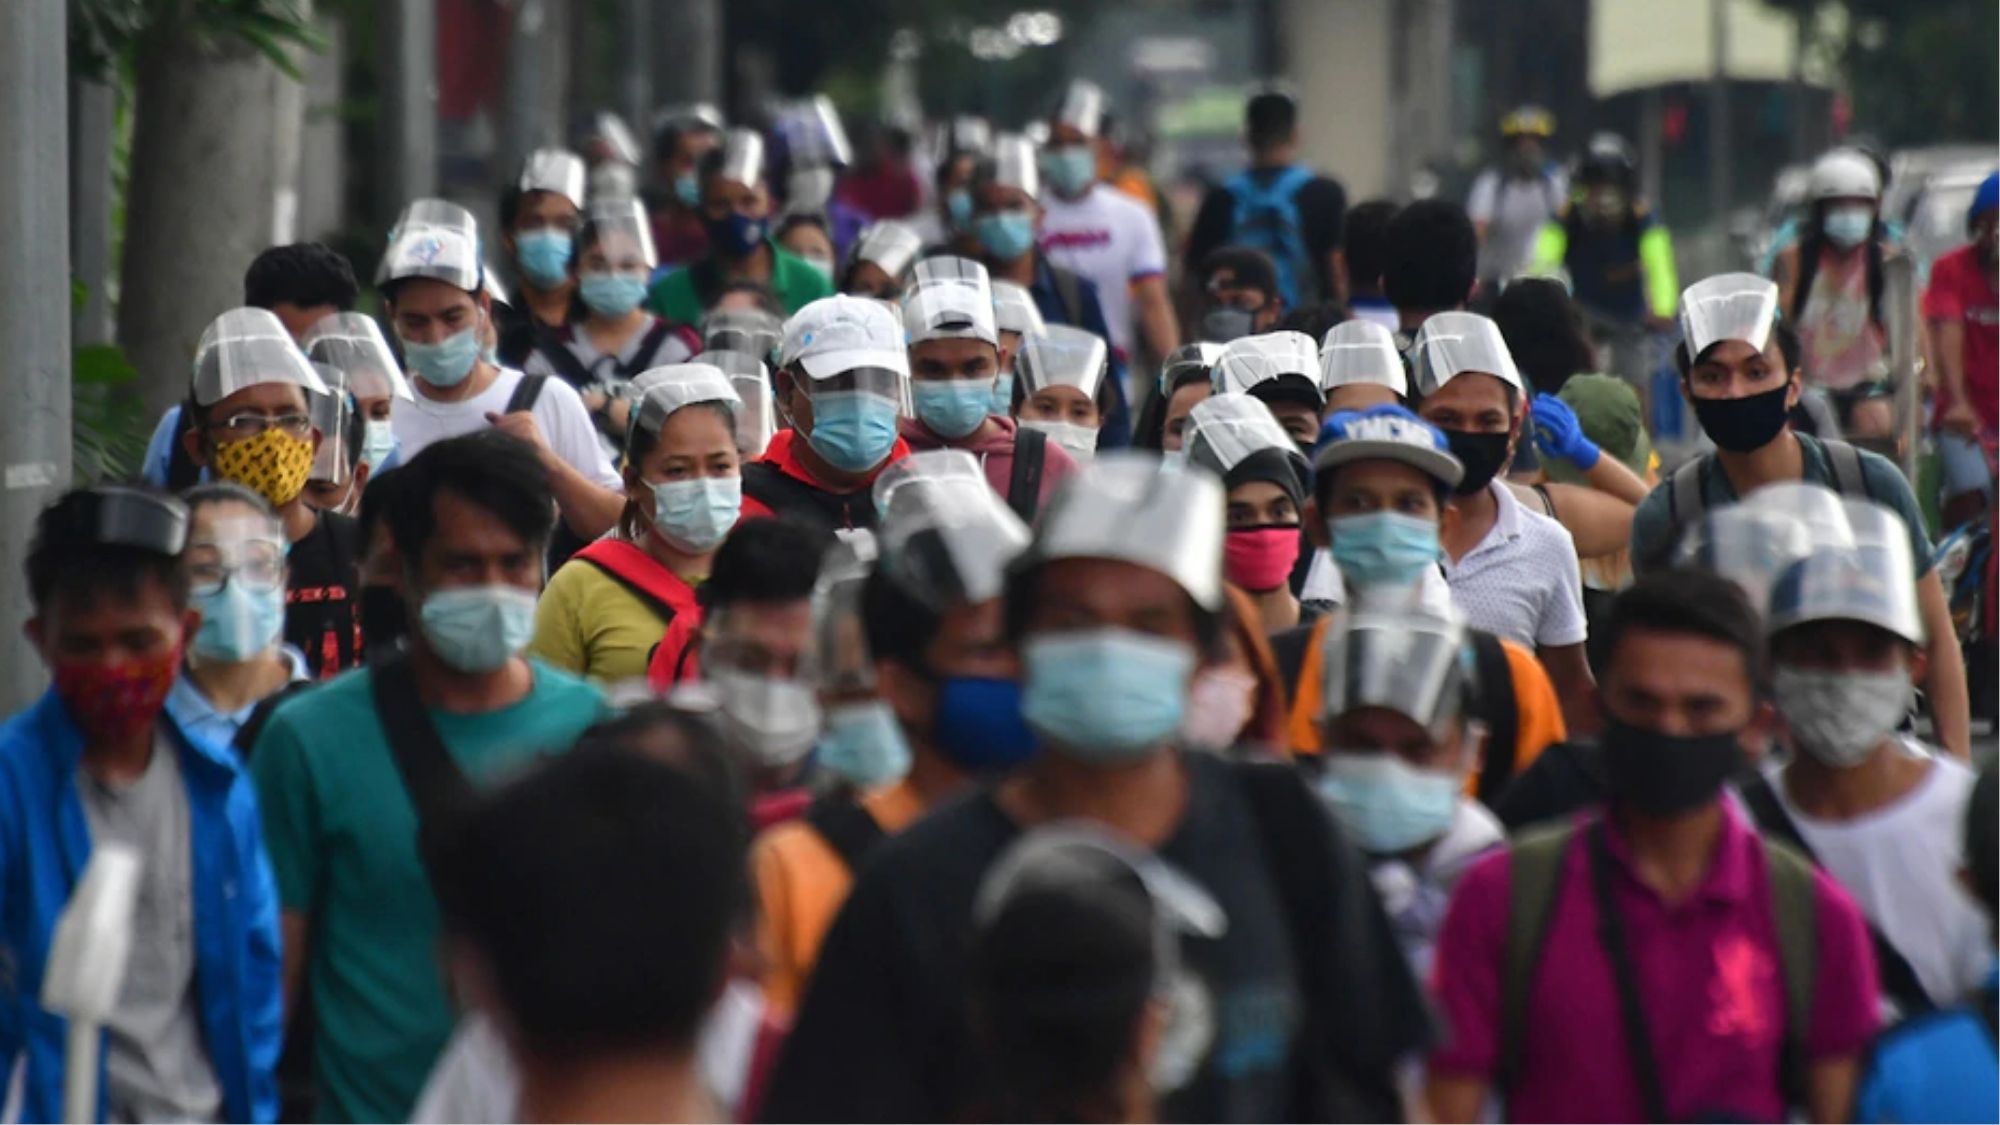 Not even pandemic could stop it; PH population grows to 109 million photo from ABS-CBN News